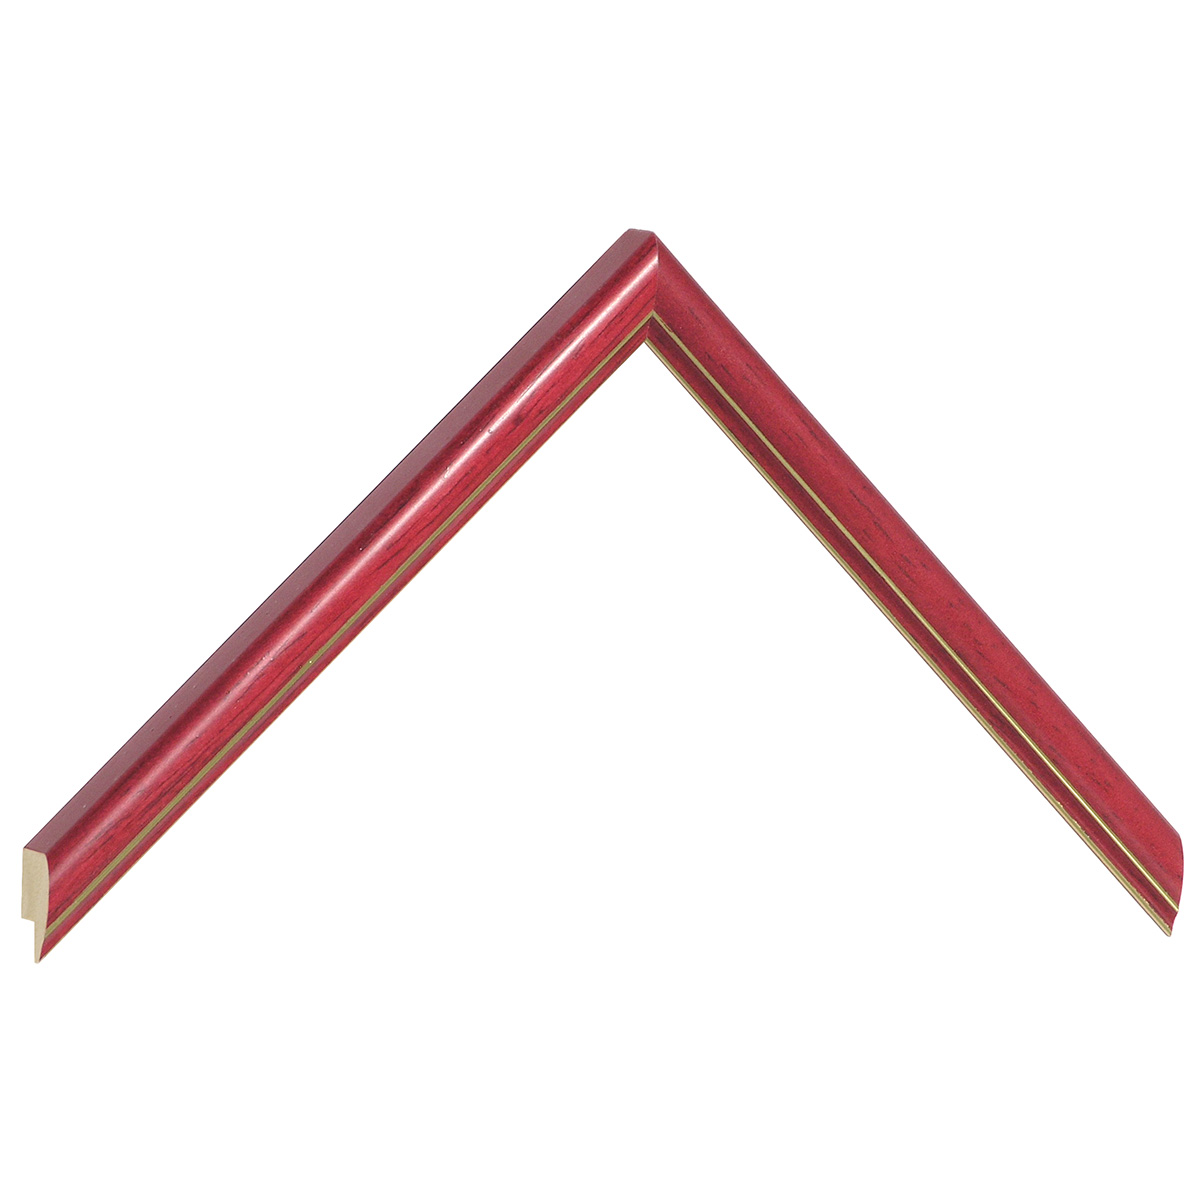 Moulding ayous jointed 13mm - red with golden edge - Sample